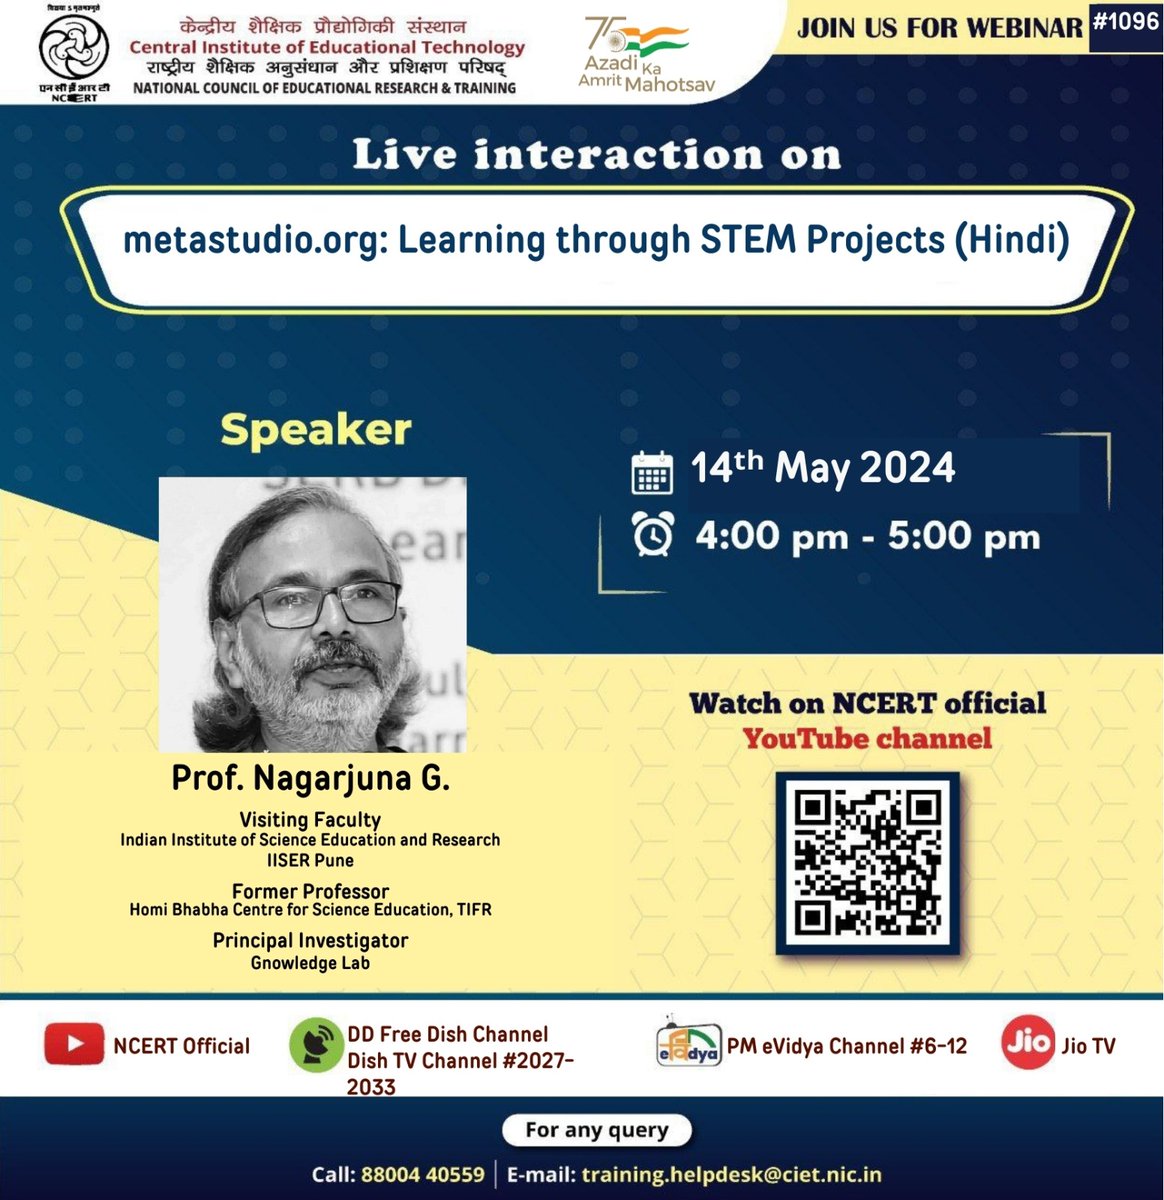 Join us for the webinar 'metastudio.org: Learning through STEM Projects' (Hindi) on 14ᵗʰ May 2024, from 4:00-5:00 pm. 

For more information, visit: ciet.ncert.gov.in/webinar

For any query, write to us @ training.helpdesk@ciet.nic.in or call #8800440559. 

#STEMeducation…